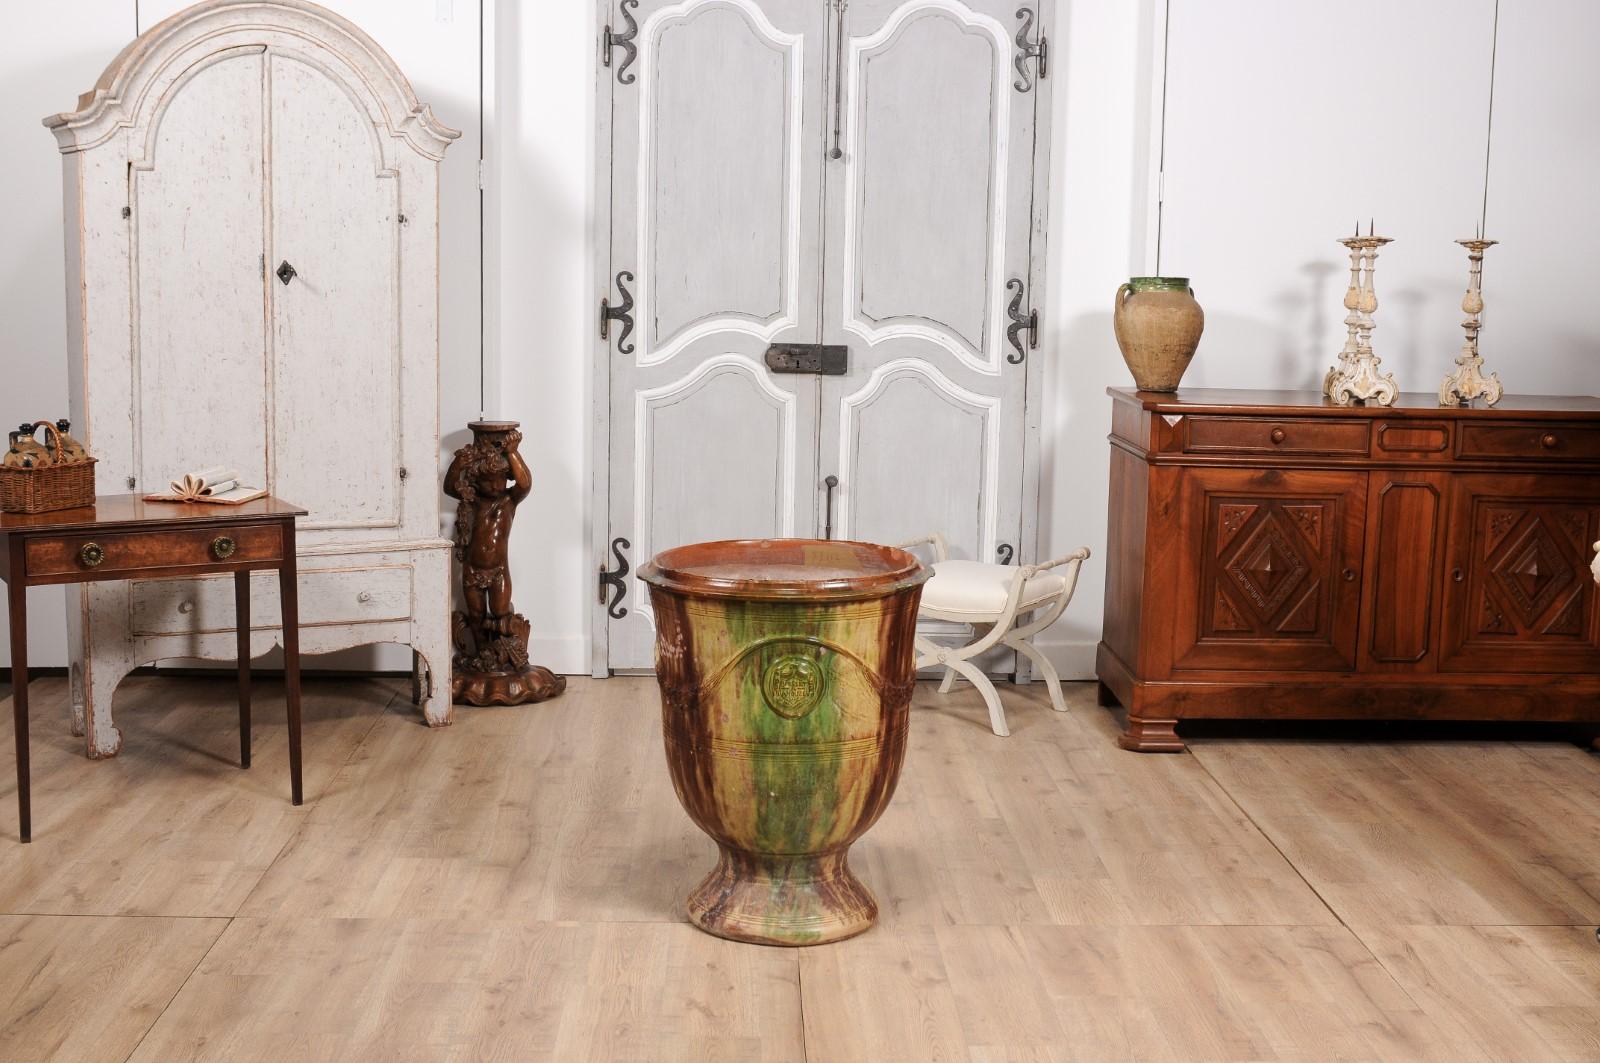 Large French Boisset Anduze Jar with Brown, Green Glaze and Swags, 21st Century For Sale 2